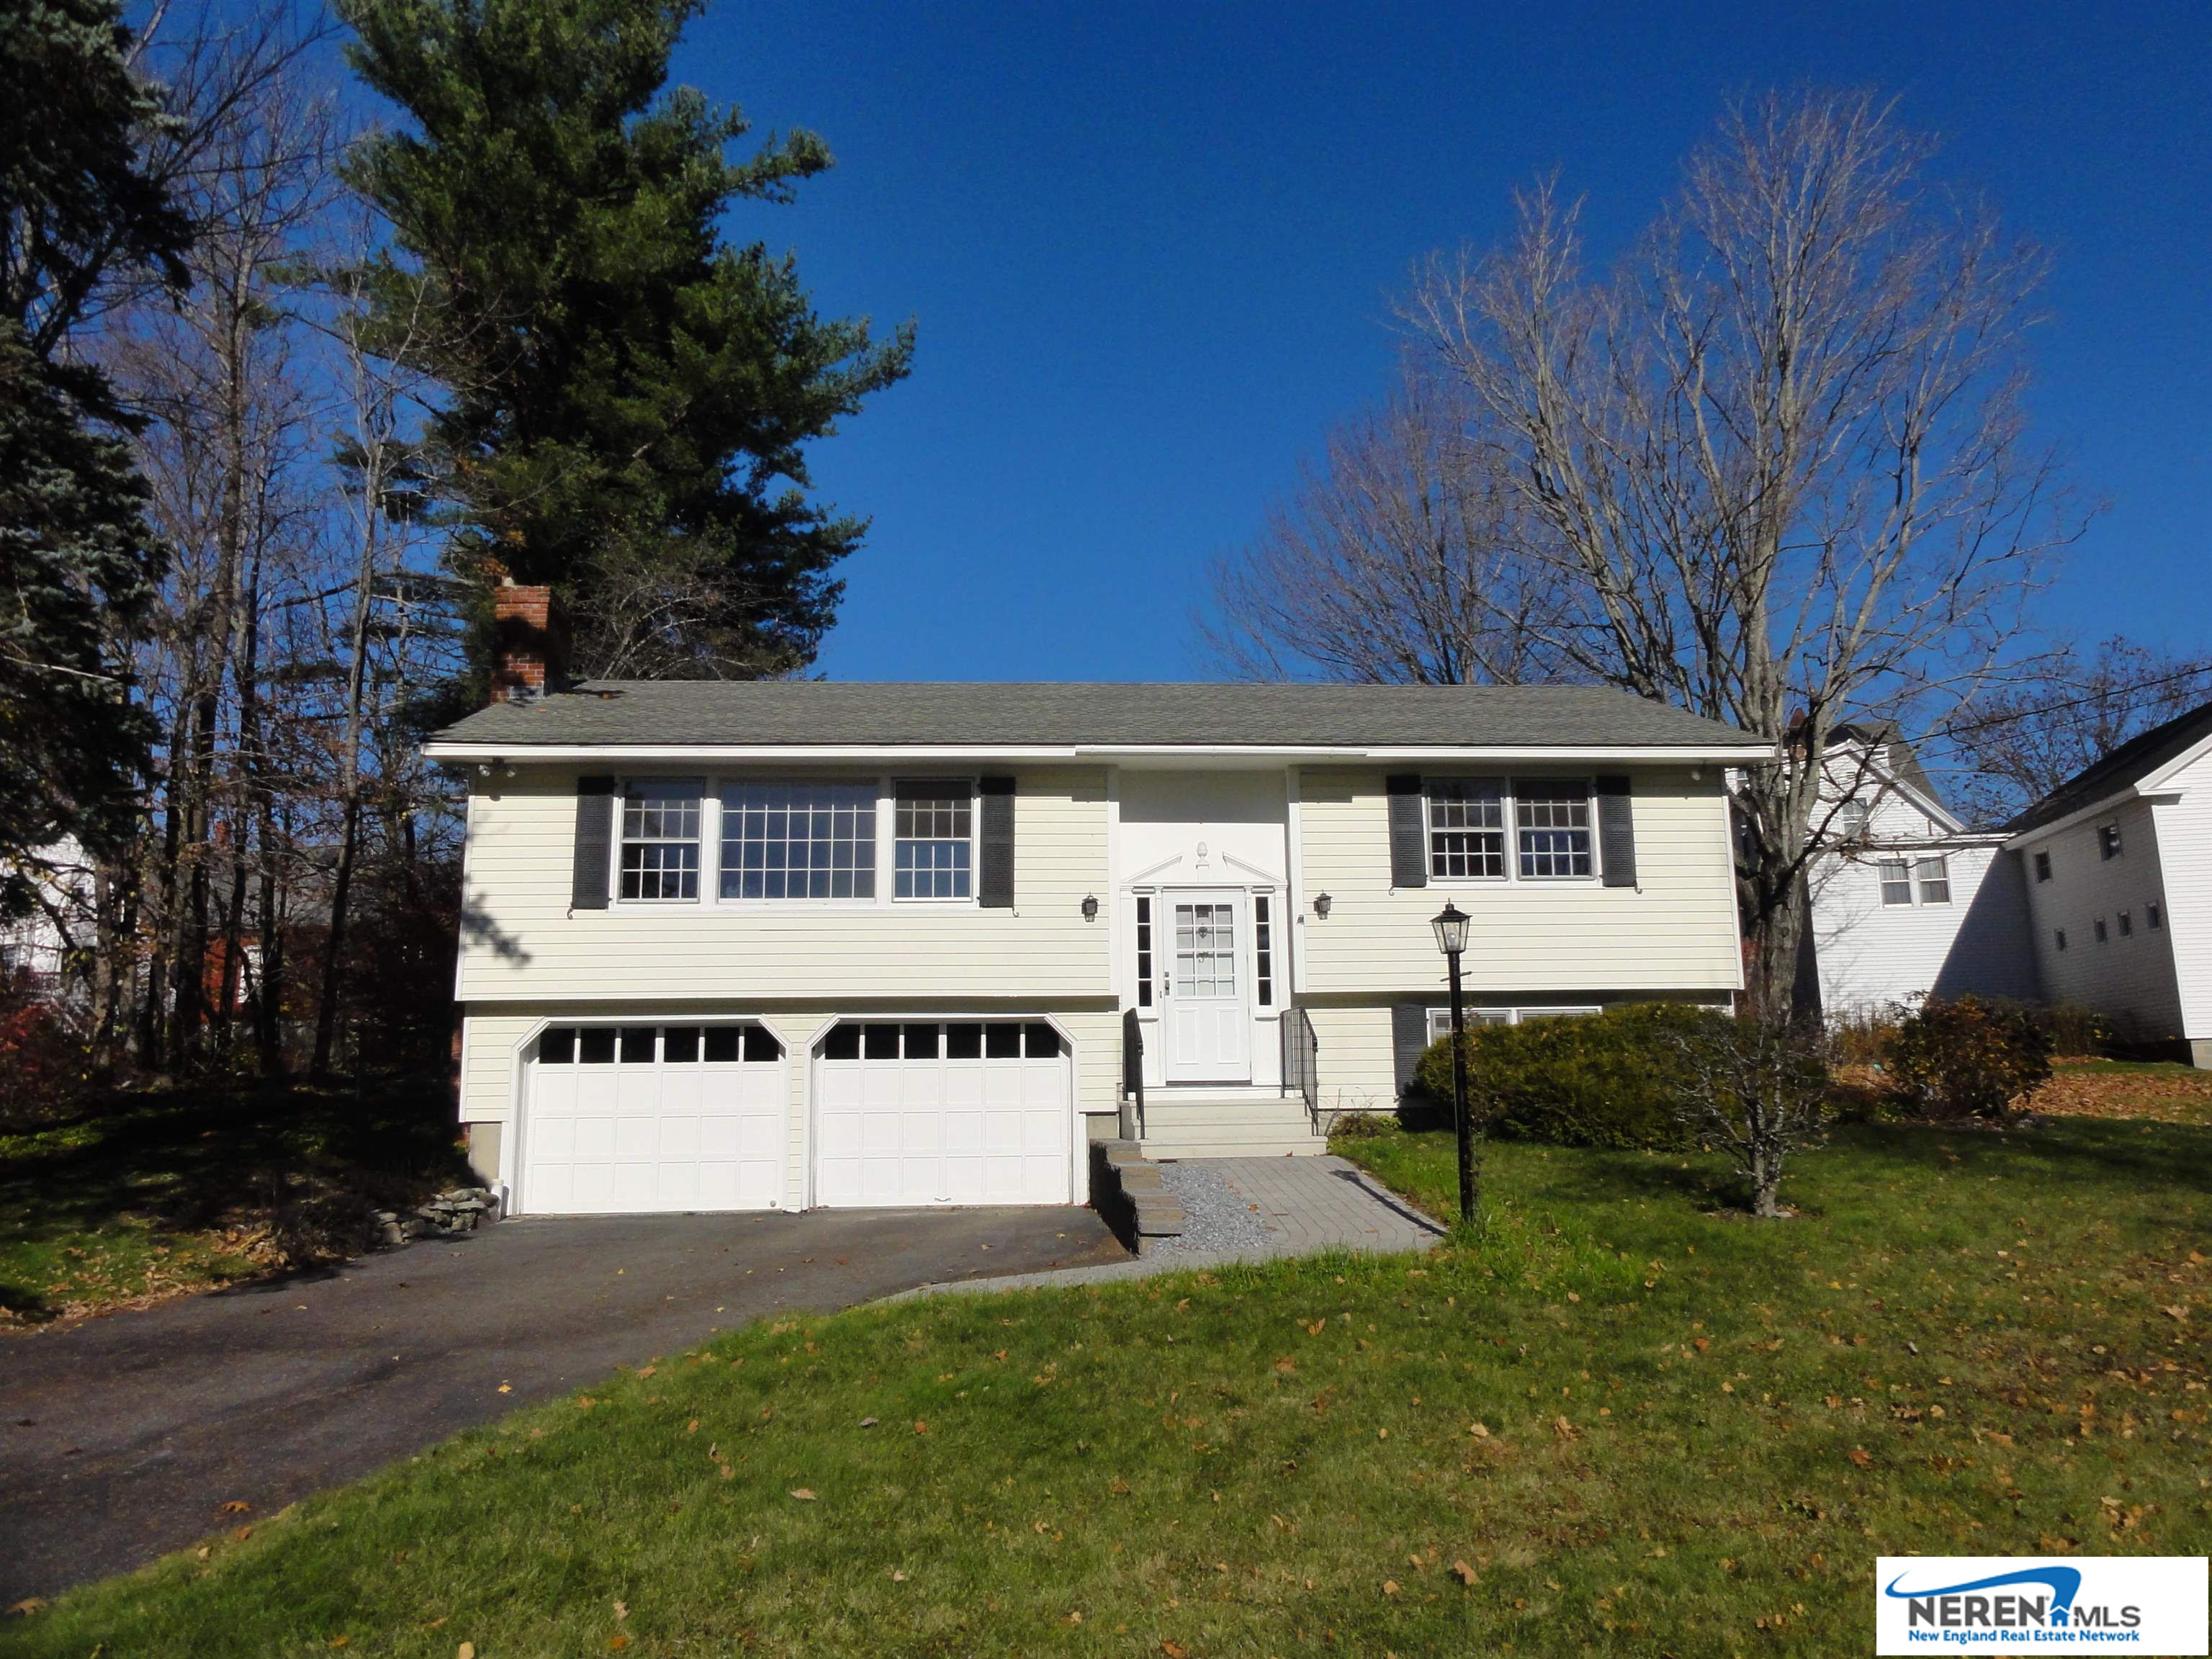 38 Parkside Road, New London, NH 03257